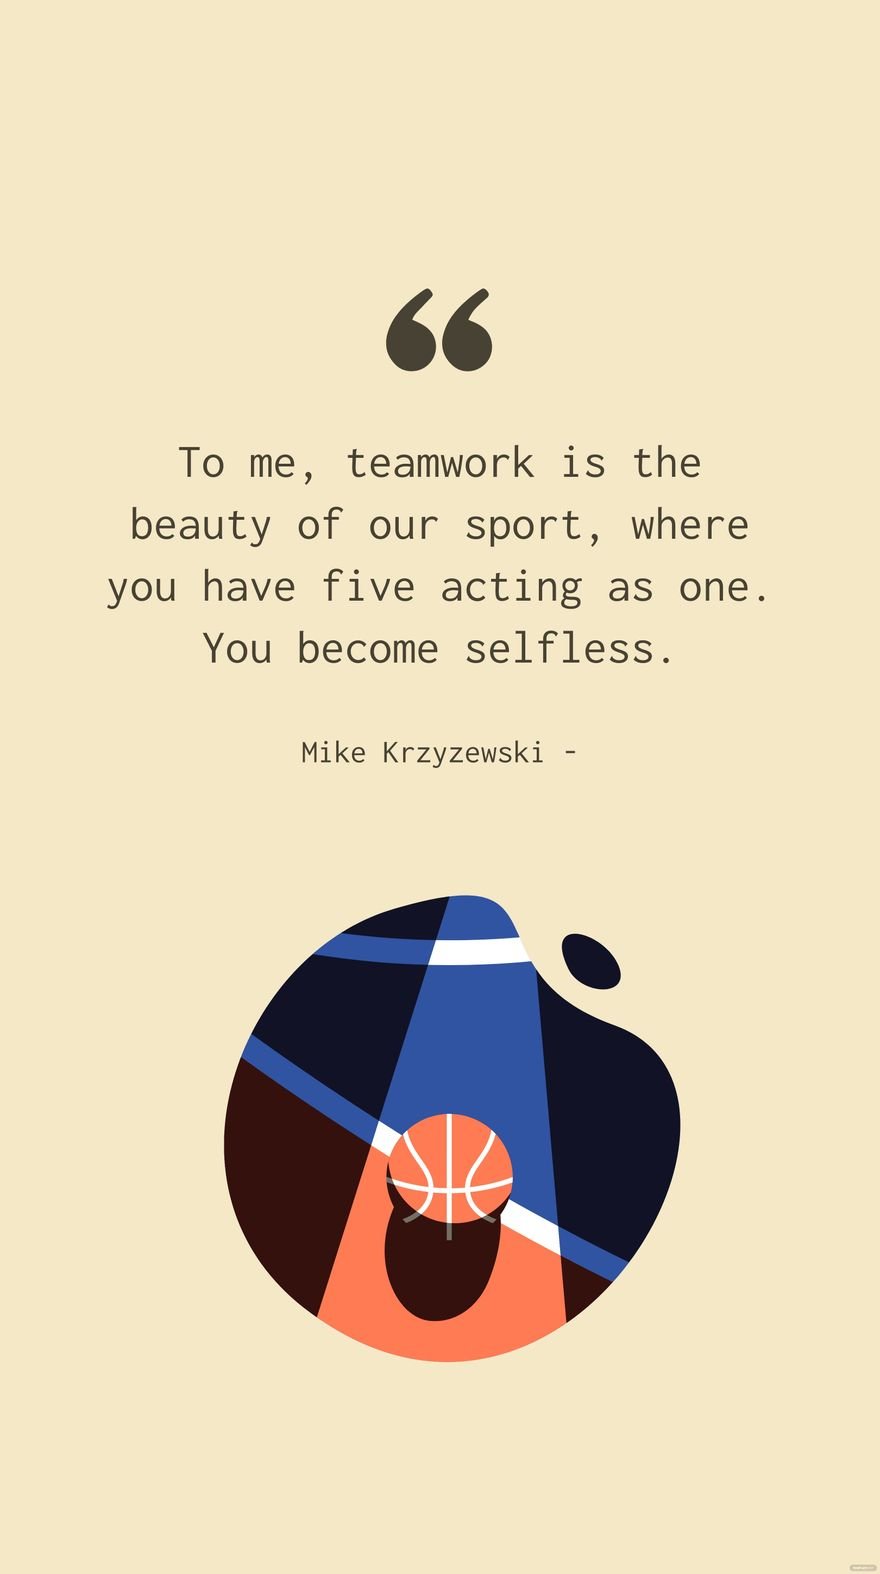 Mike Krzyzewski - To me, teamwork is the beauty of our sport, where you have five acting as one. You become selfless.